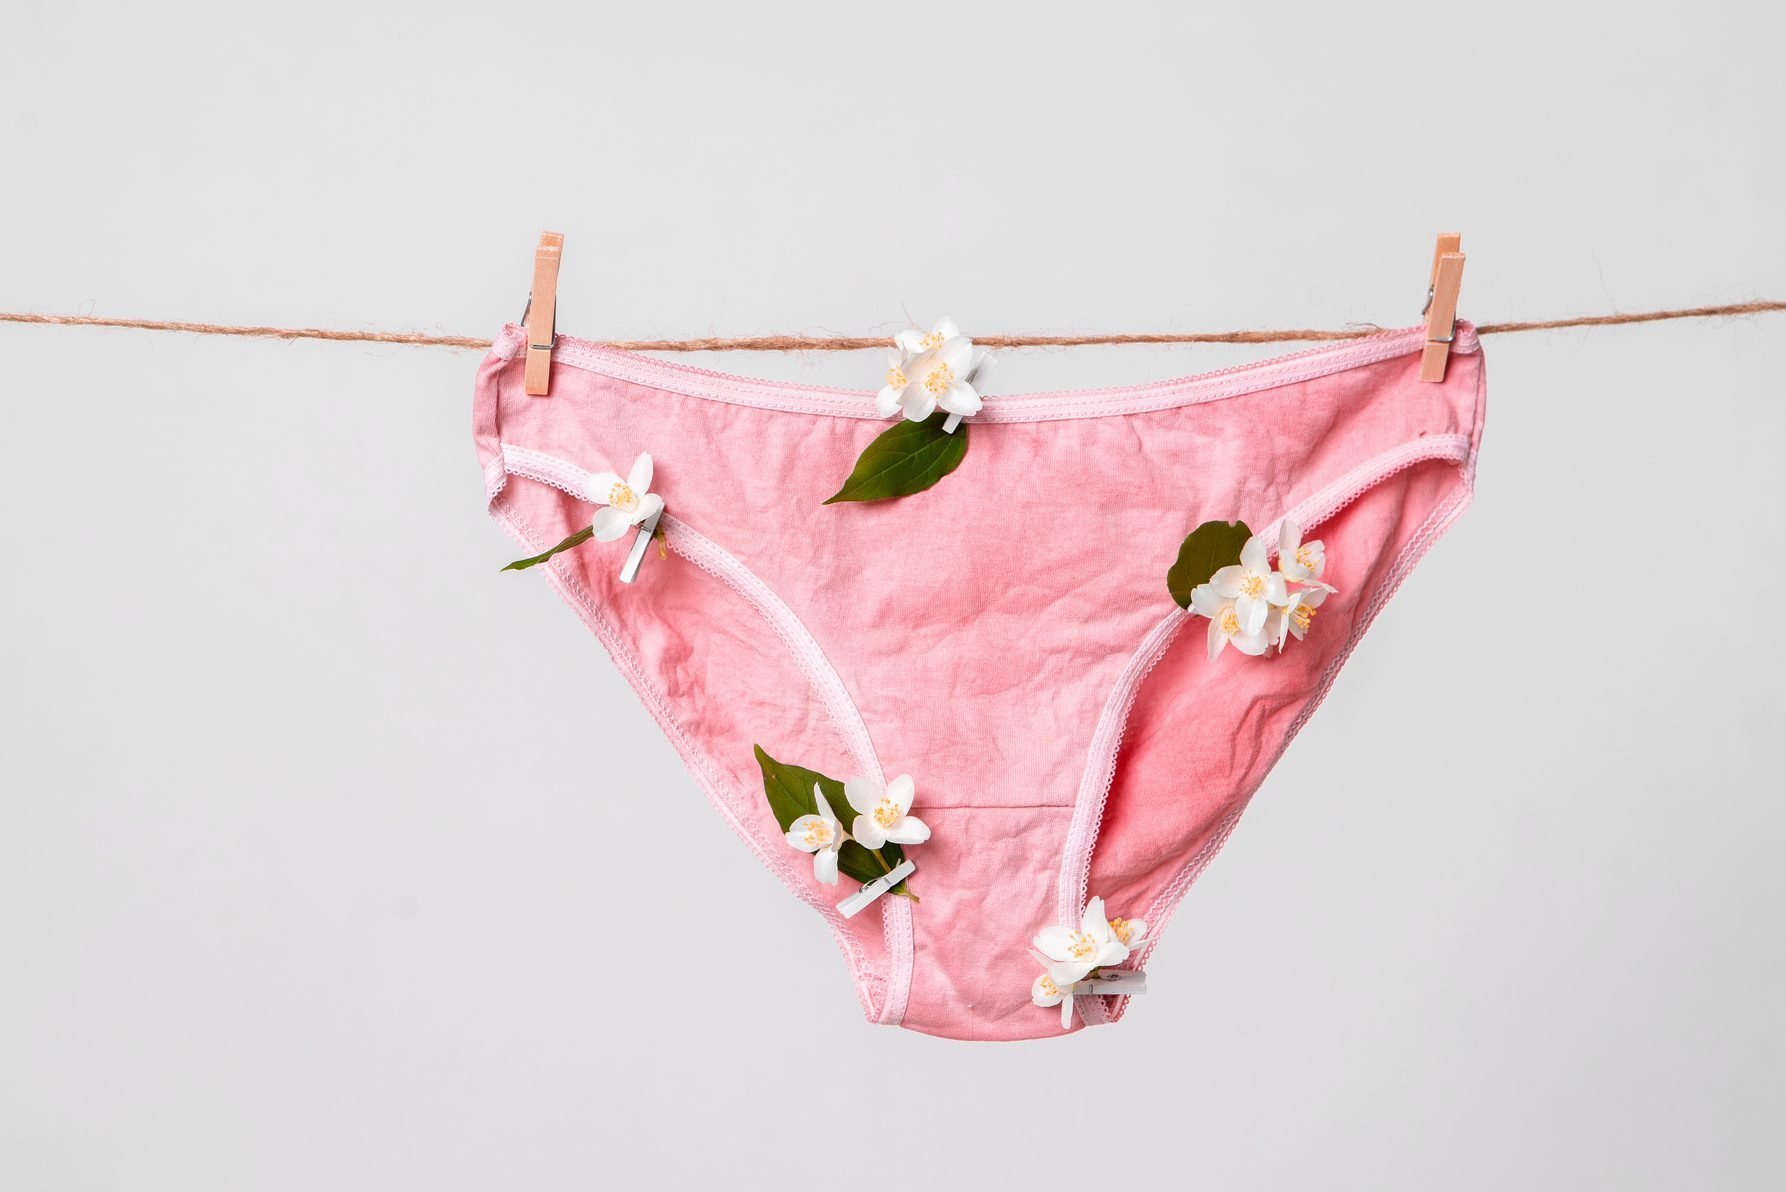 The smell of your panties can tell you a lot about your feminine healt